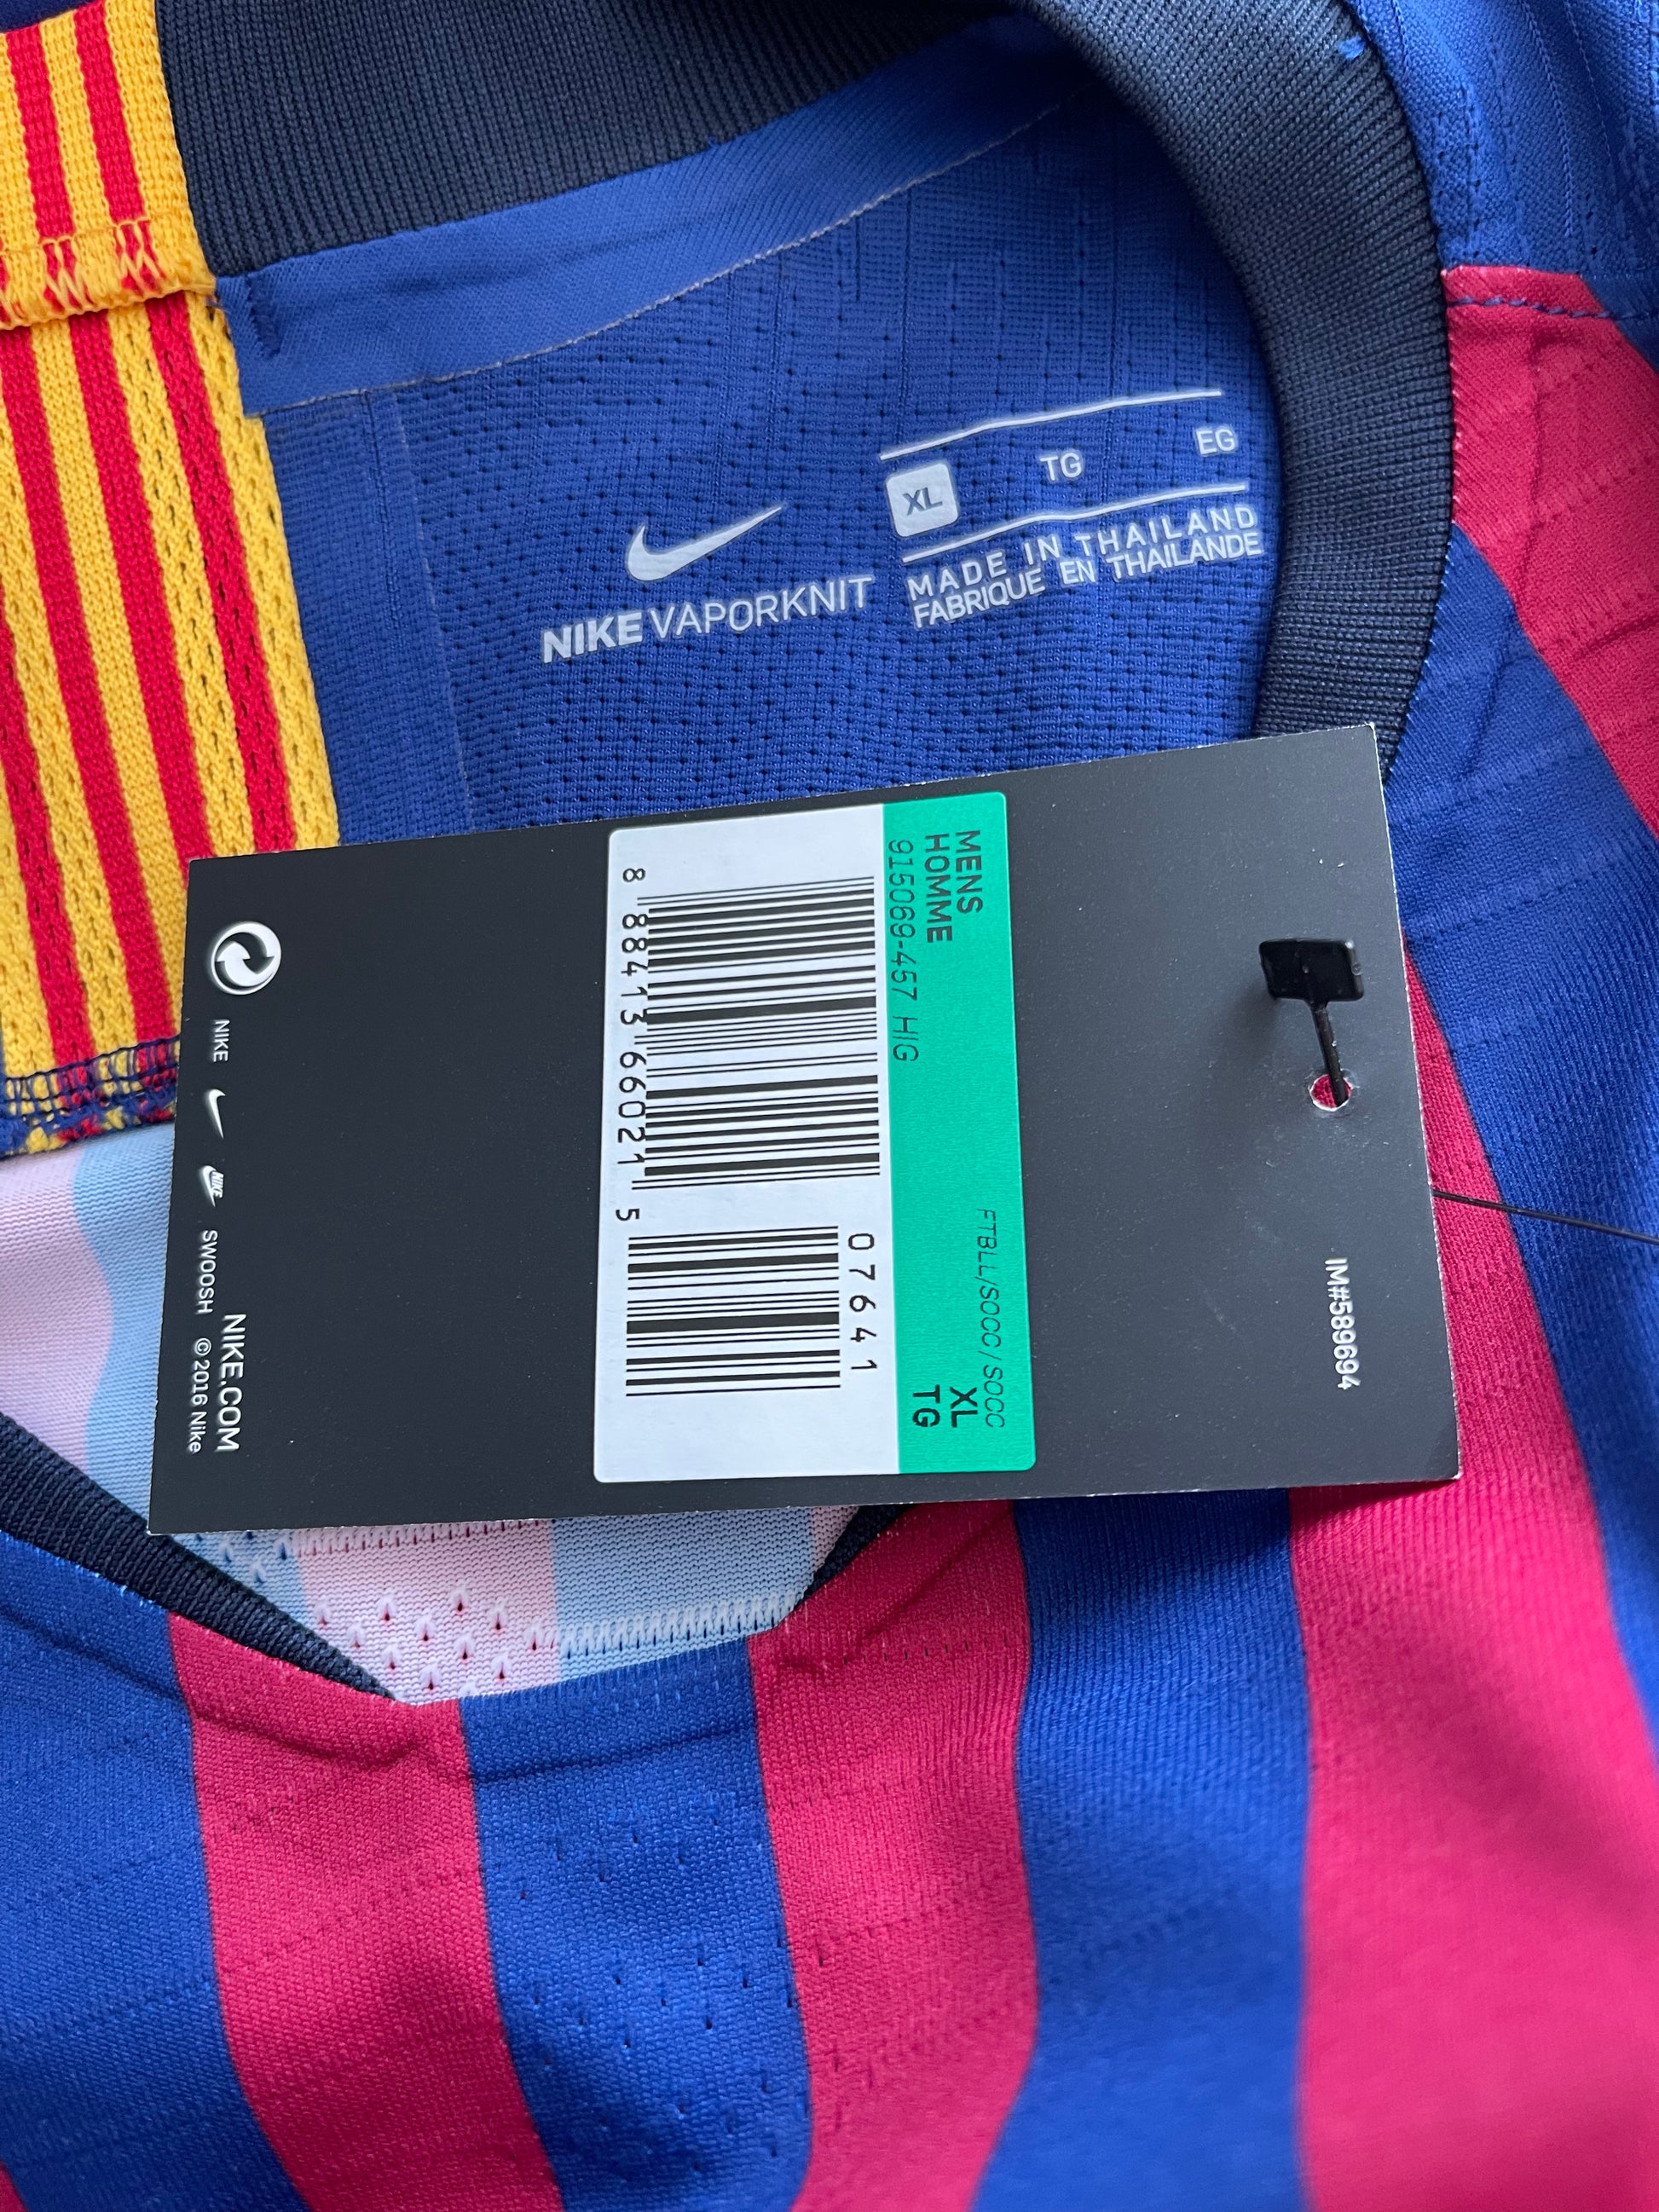  Authentic New FC Barcelona Nike Aeroswift Player Issue Home Football Shirt 2017-2018 Long Sleeves BNWT Deadstock Size XL Red Blue Rakuten Unicef